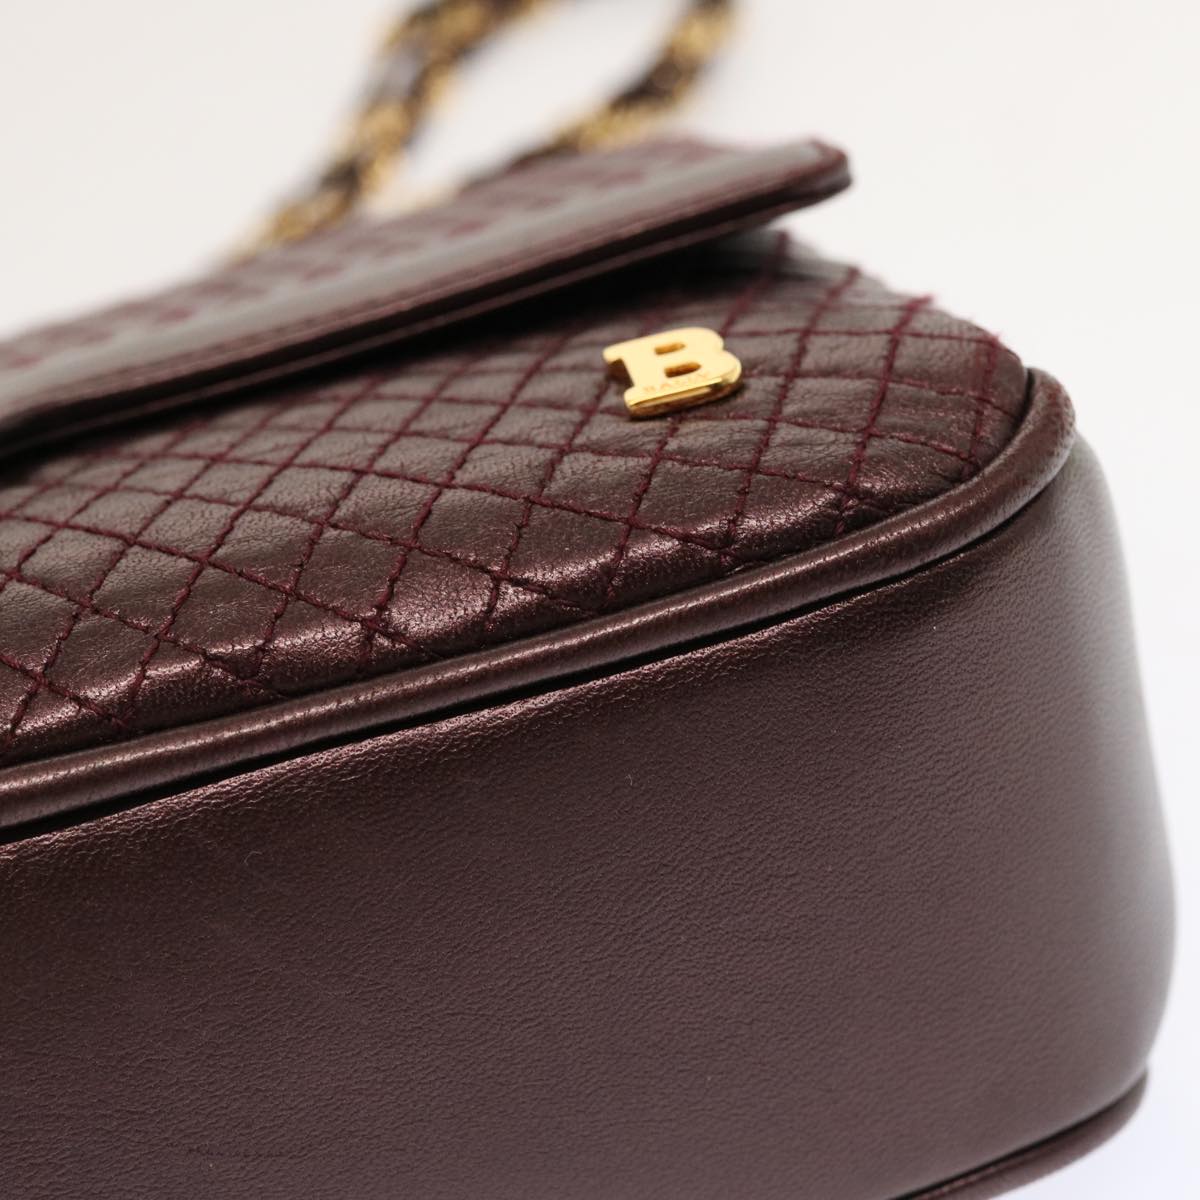 BALLY Quilted Shoulder Bag Leather Purple Auth mr084